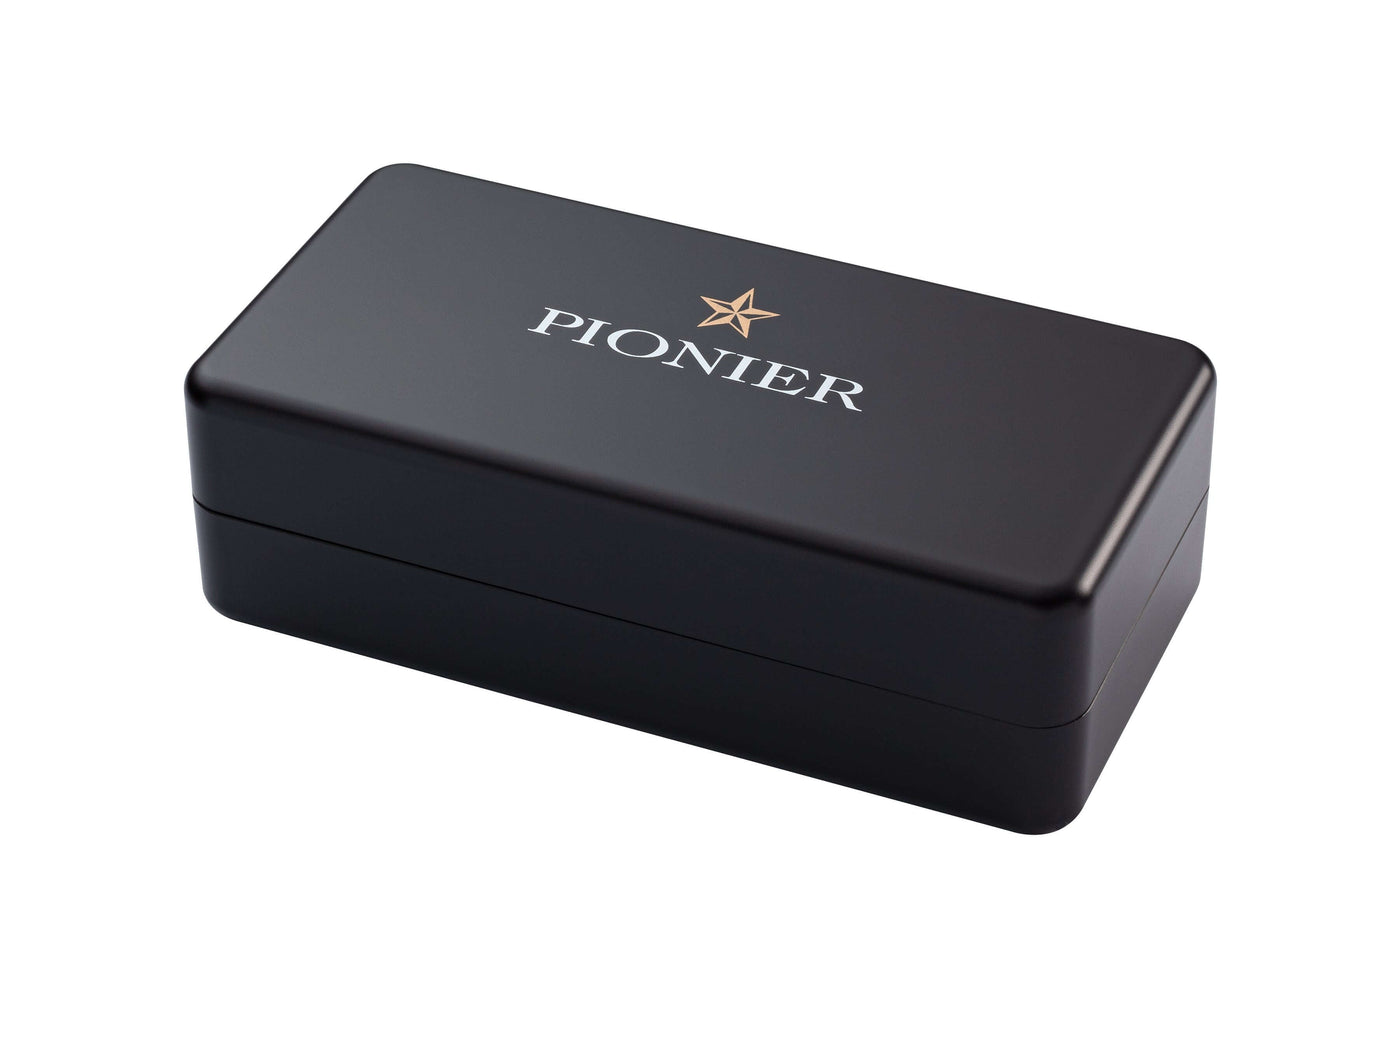 Black Pionier box with gold start imprinted on top.